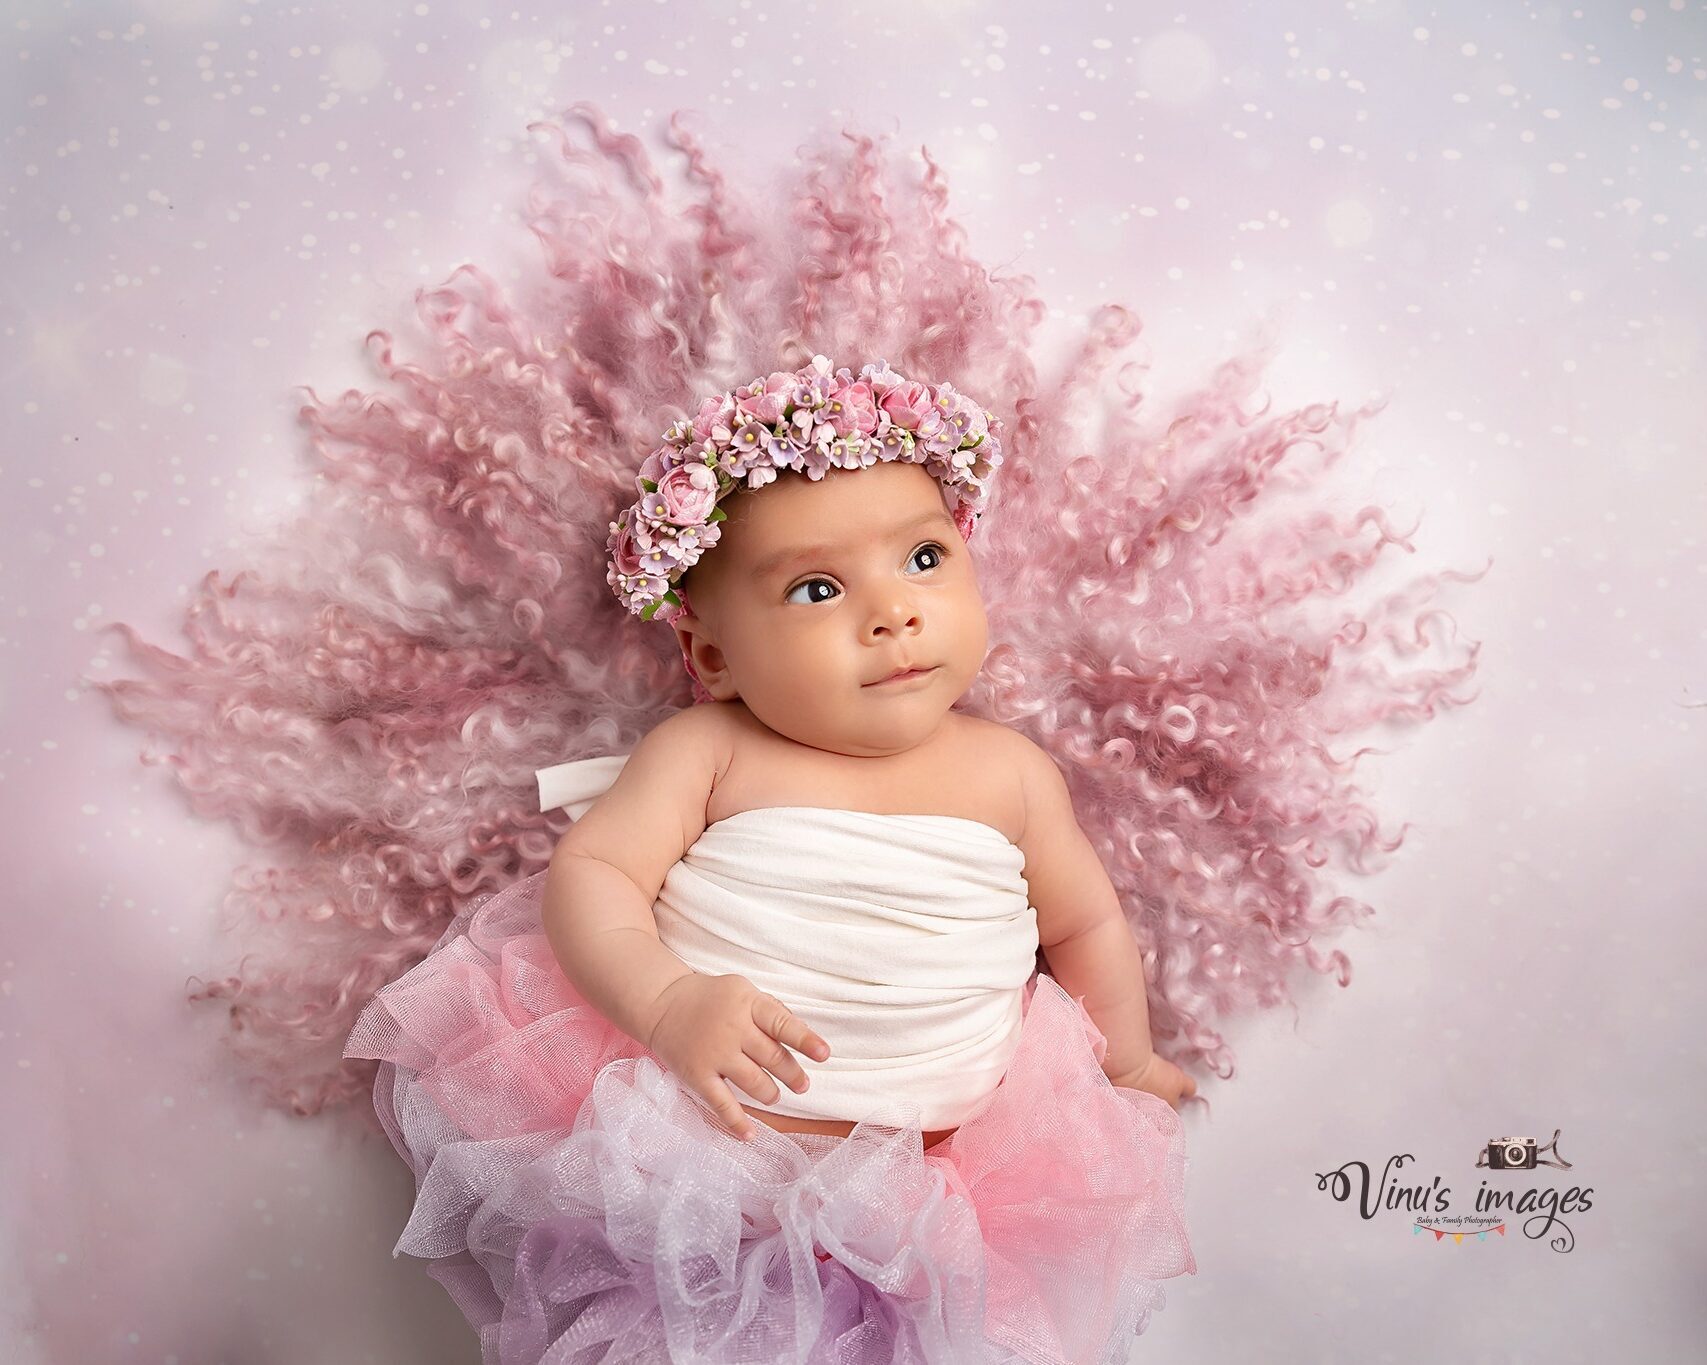 Newborn Twins Photography Tips, Ideas and Poses